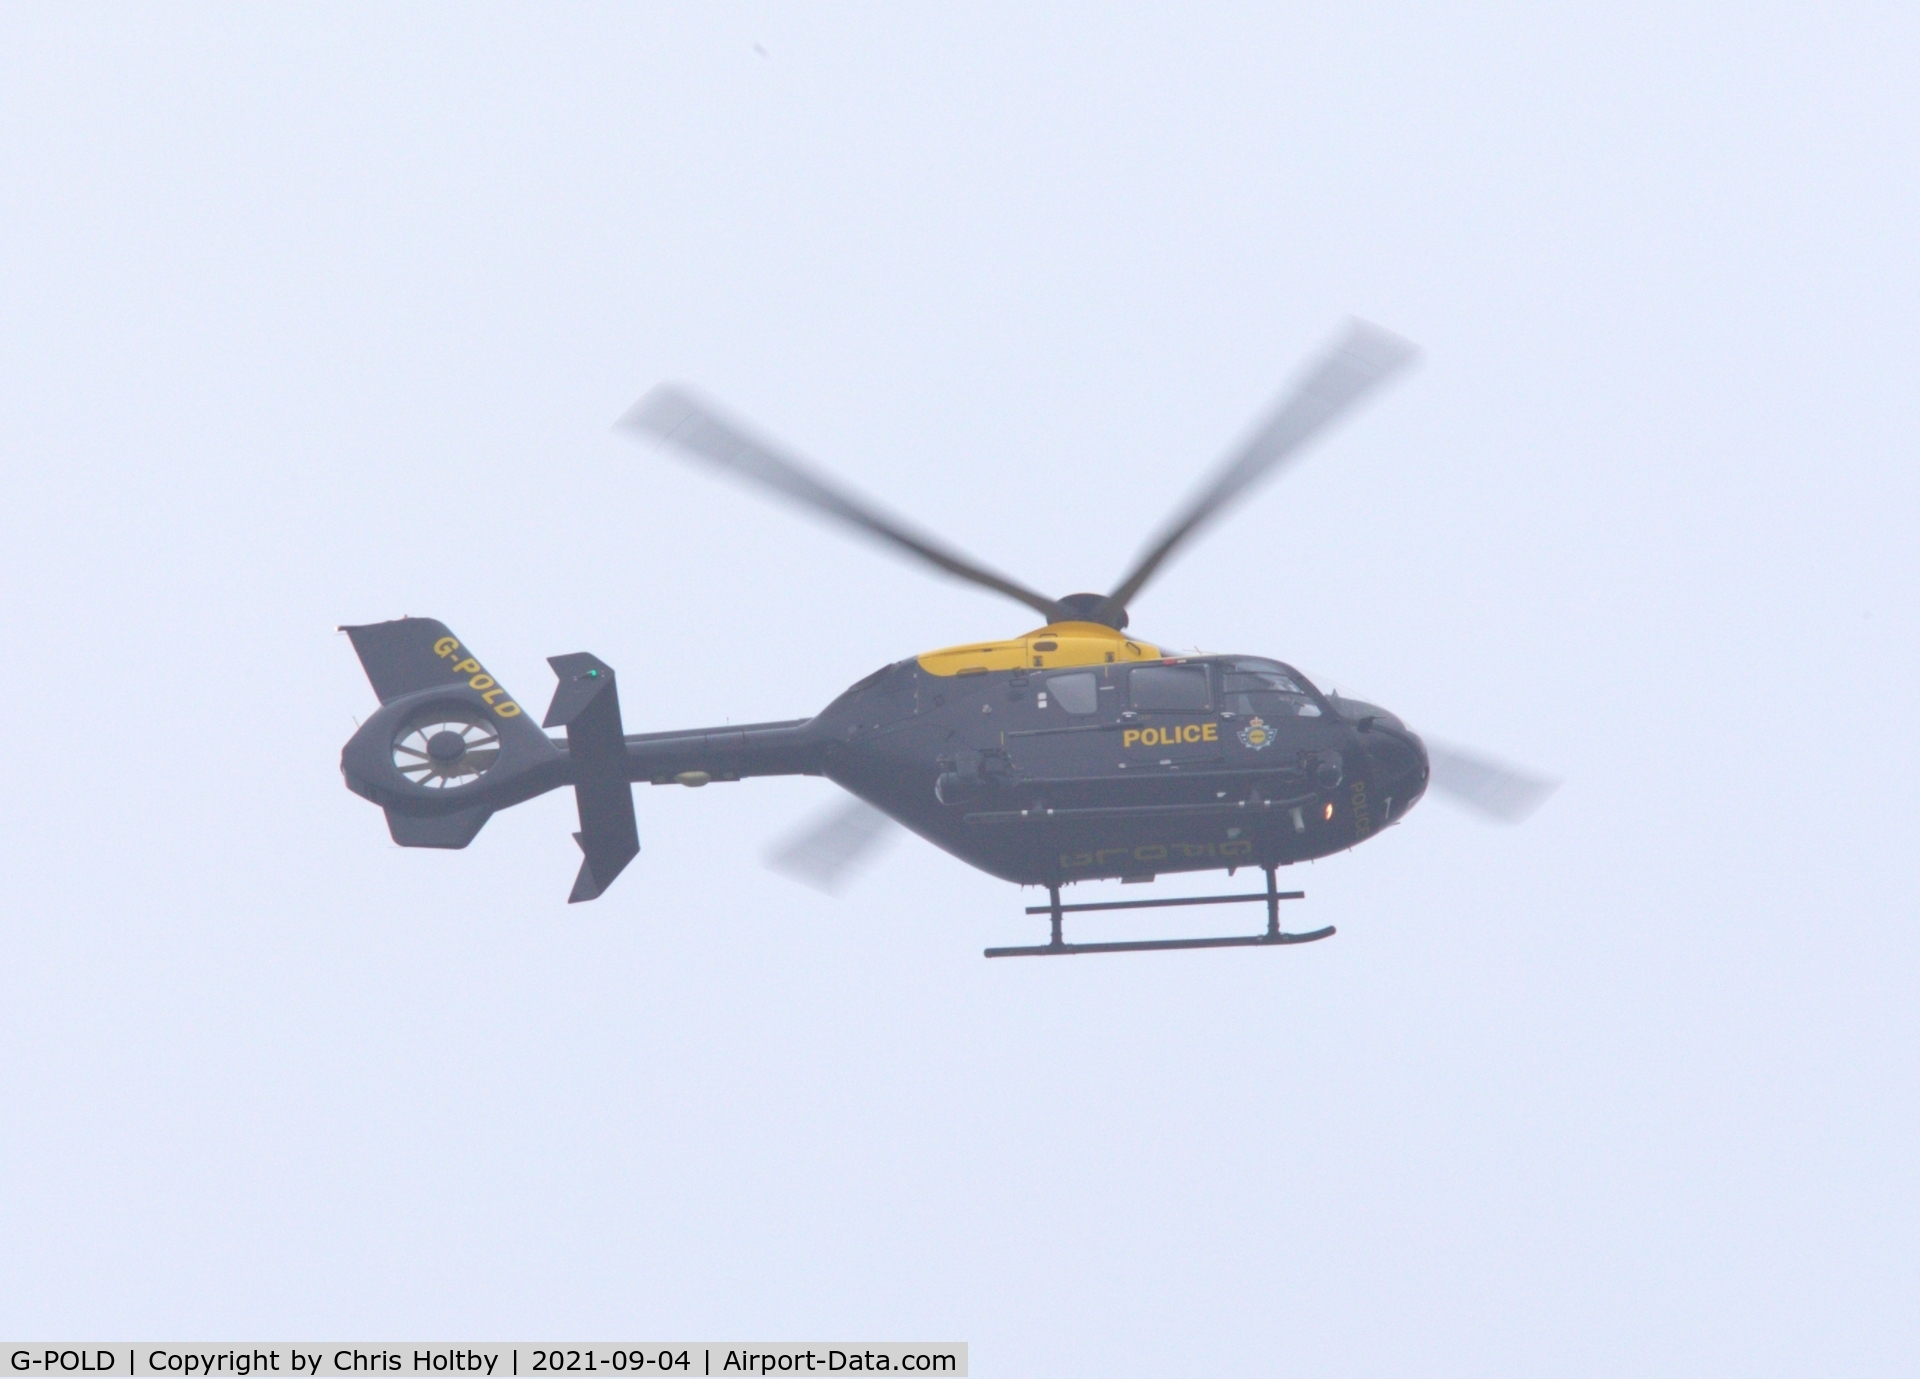 G-POLD, 2003 Eurocopter EC-135T-2 C/N 0300, Over Potters Bar responding to emercall. Based at EGSX